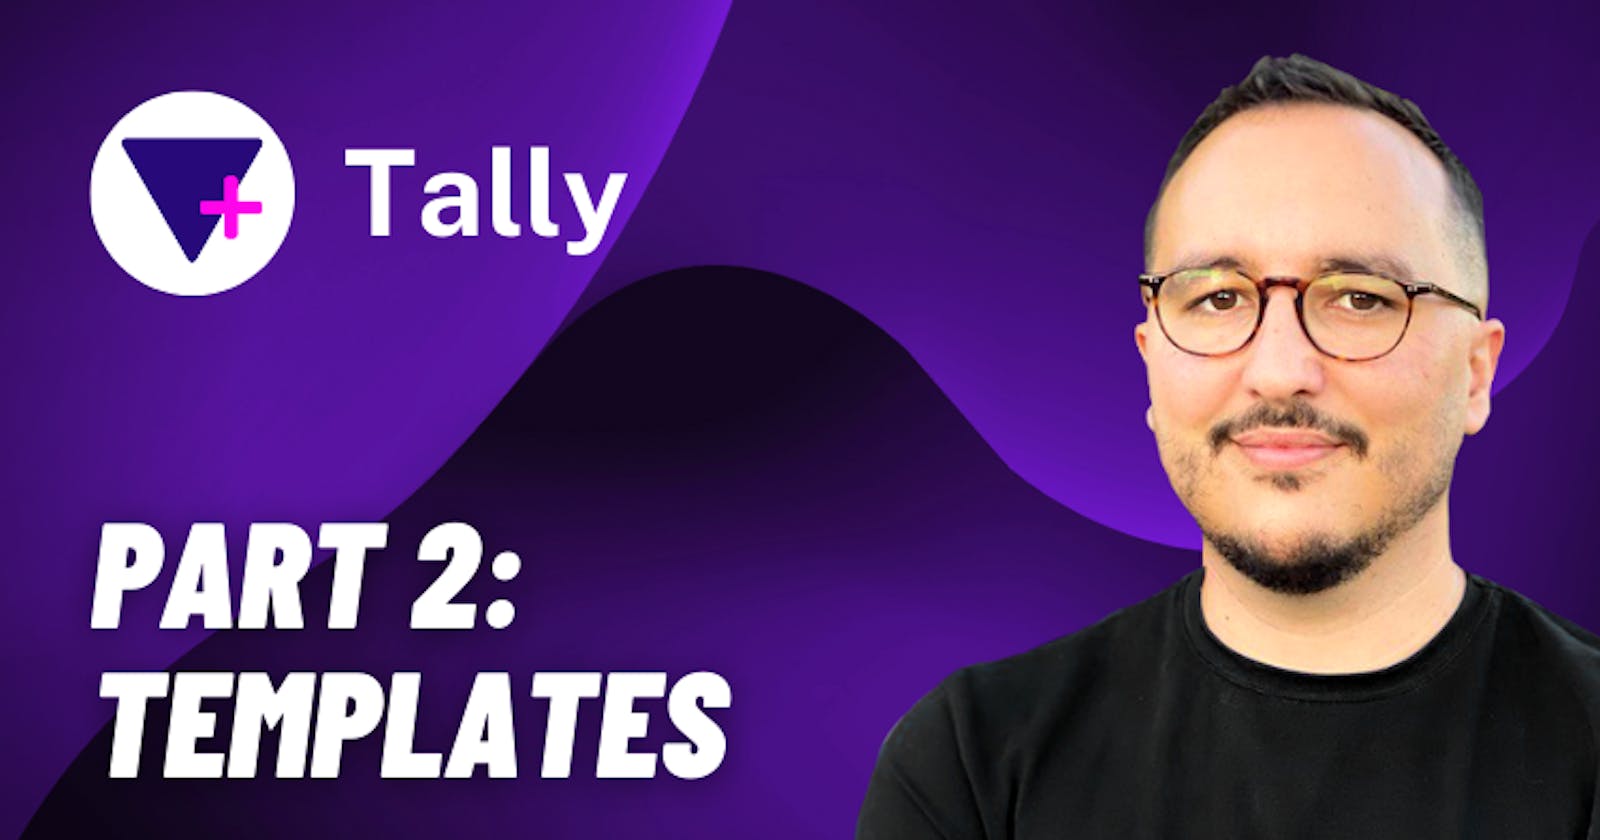 Create templates with Tally